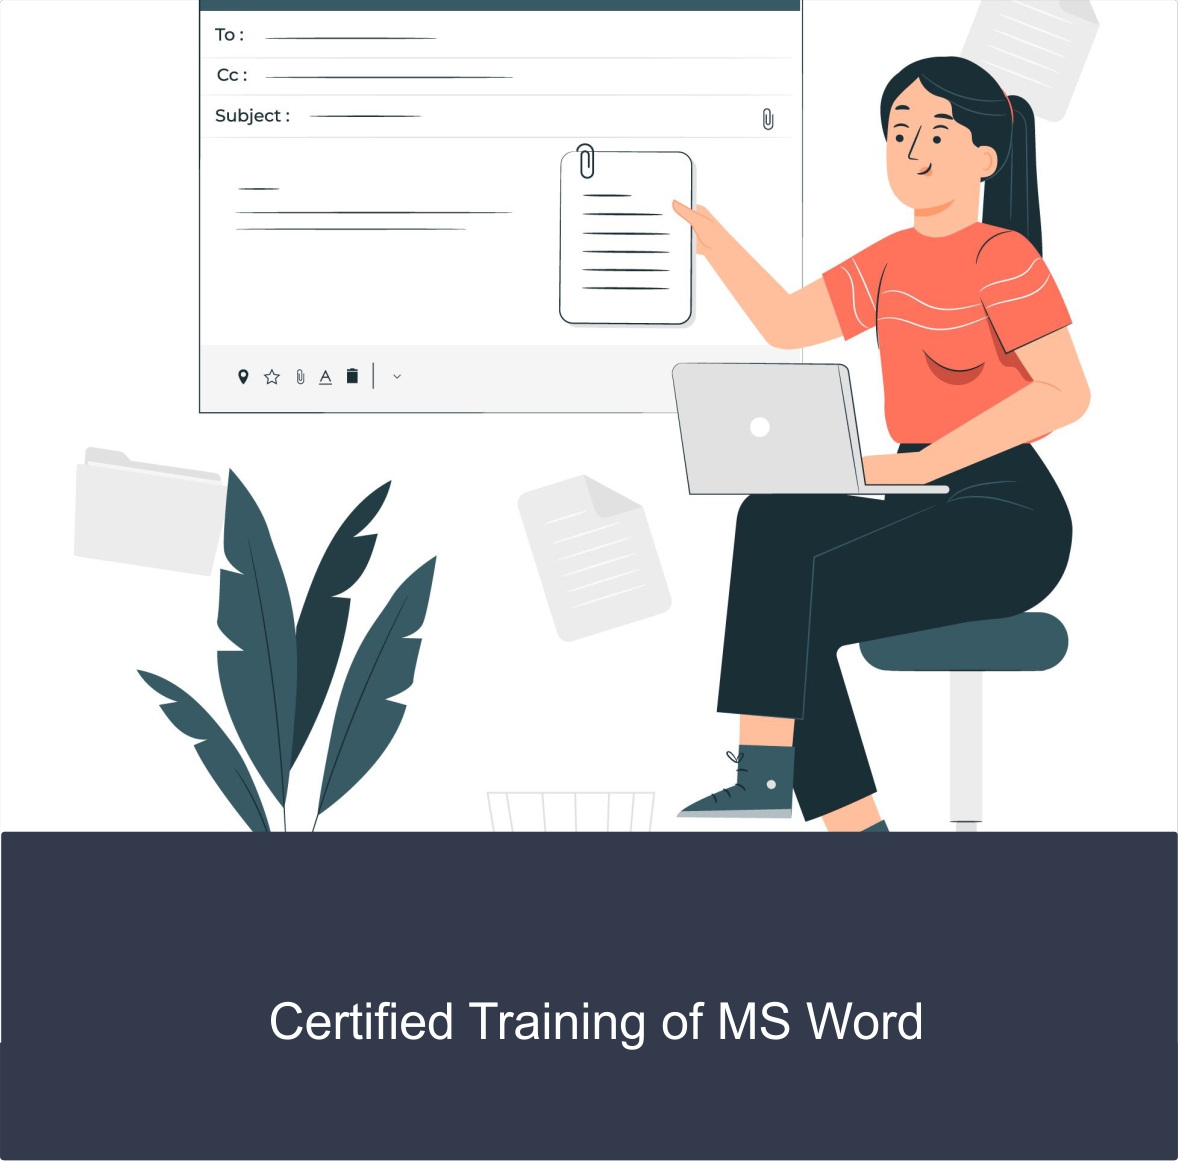 Certified Training of MS Word